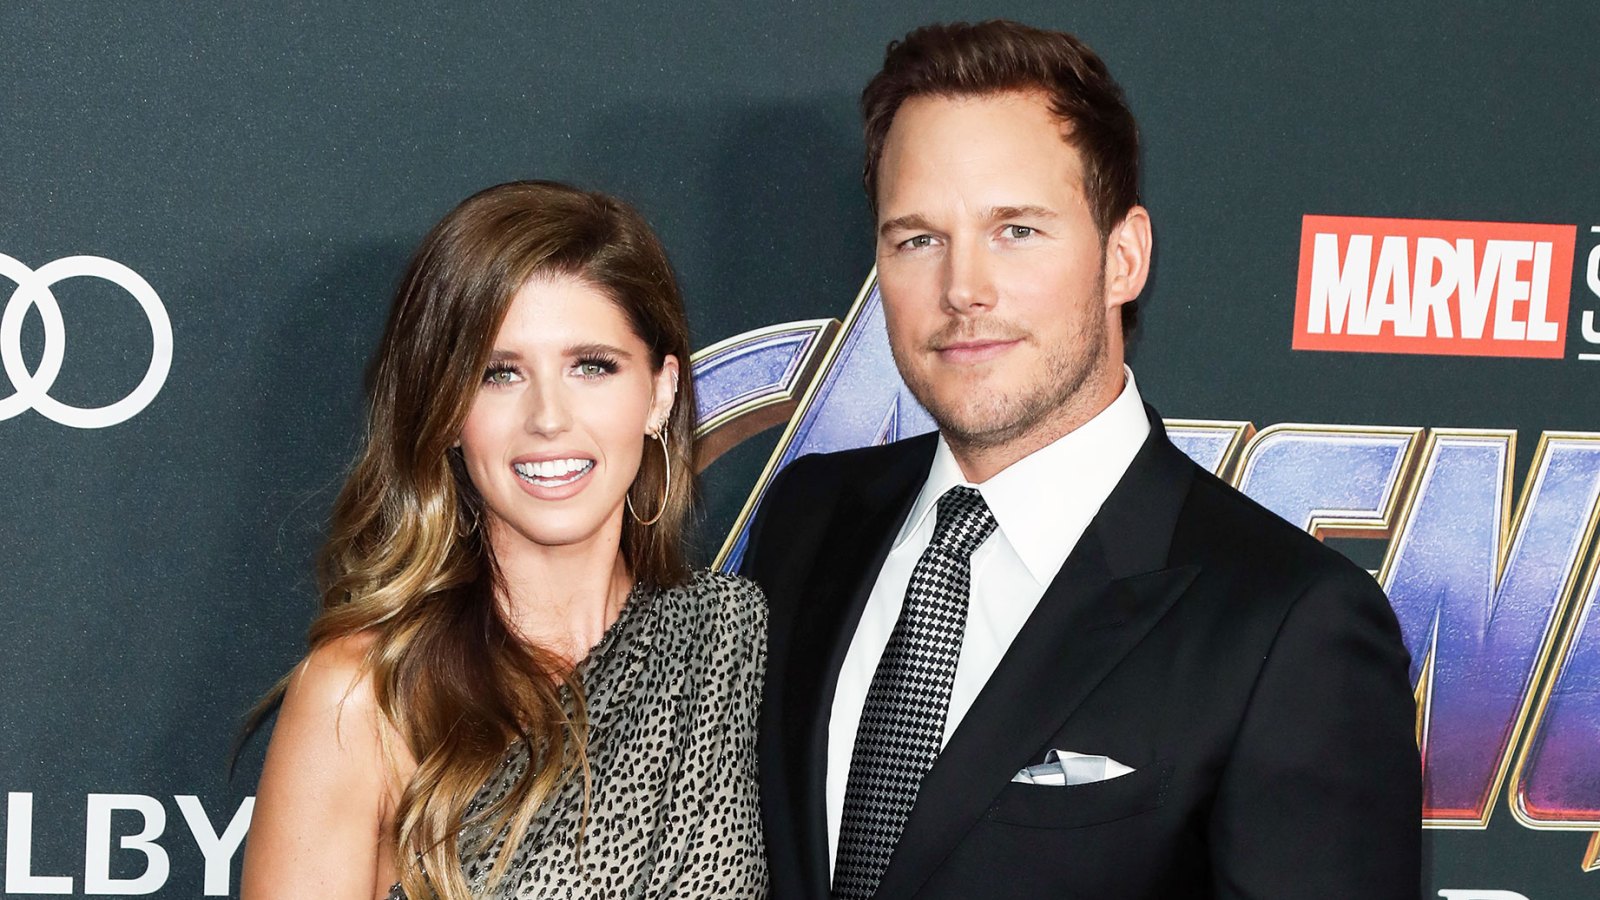 Chris Pratt and Katherine Schwarzenegger Passed Out Way Before Midnight on New Year's Eve